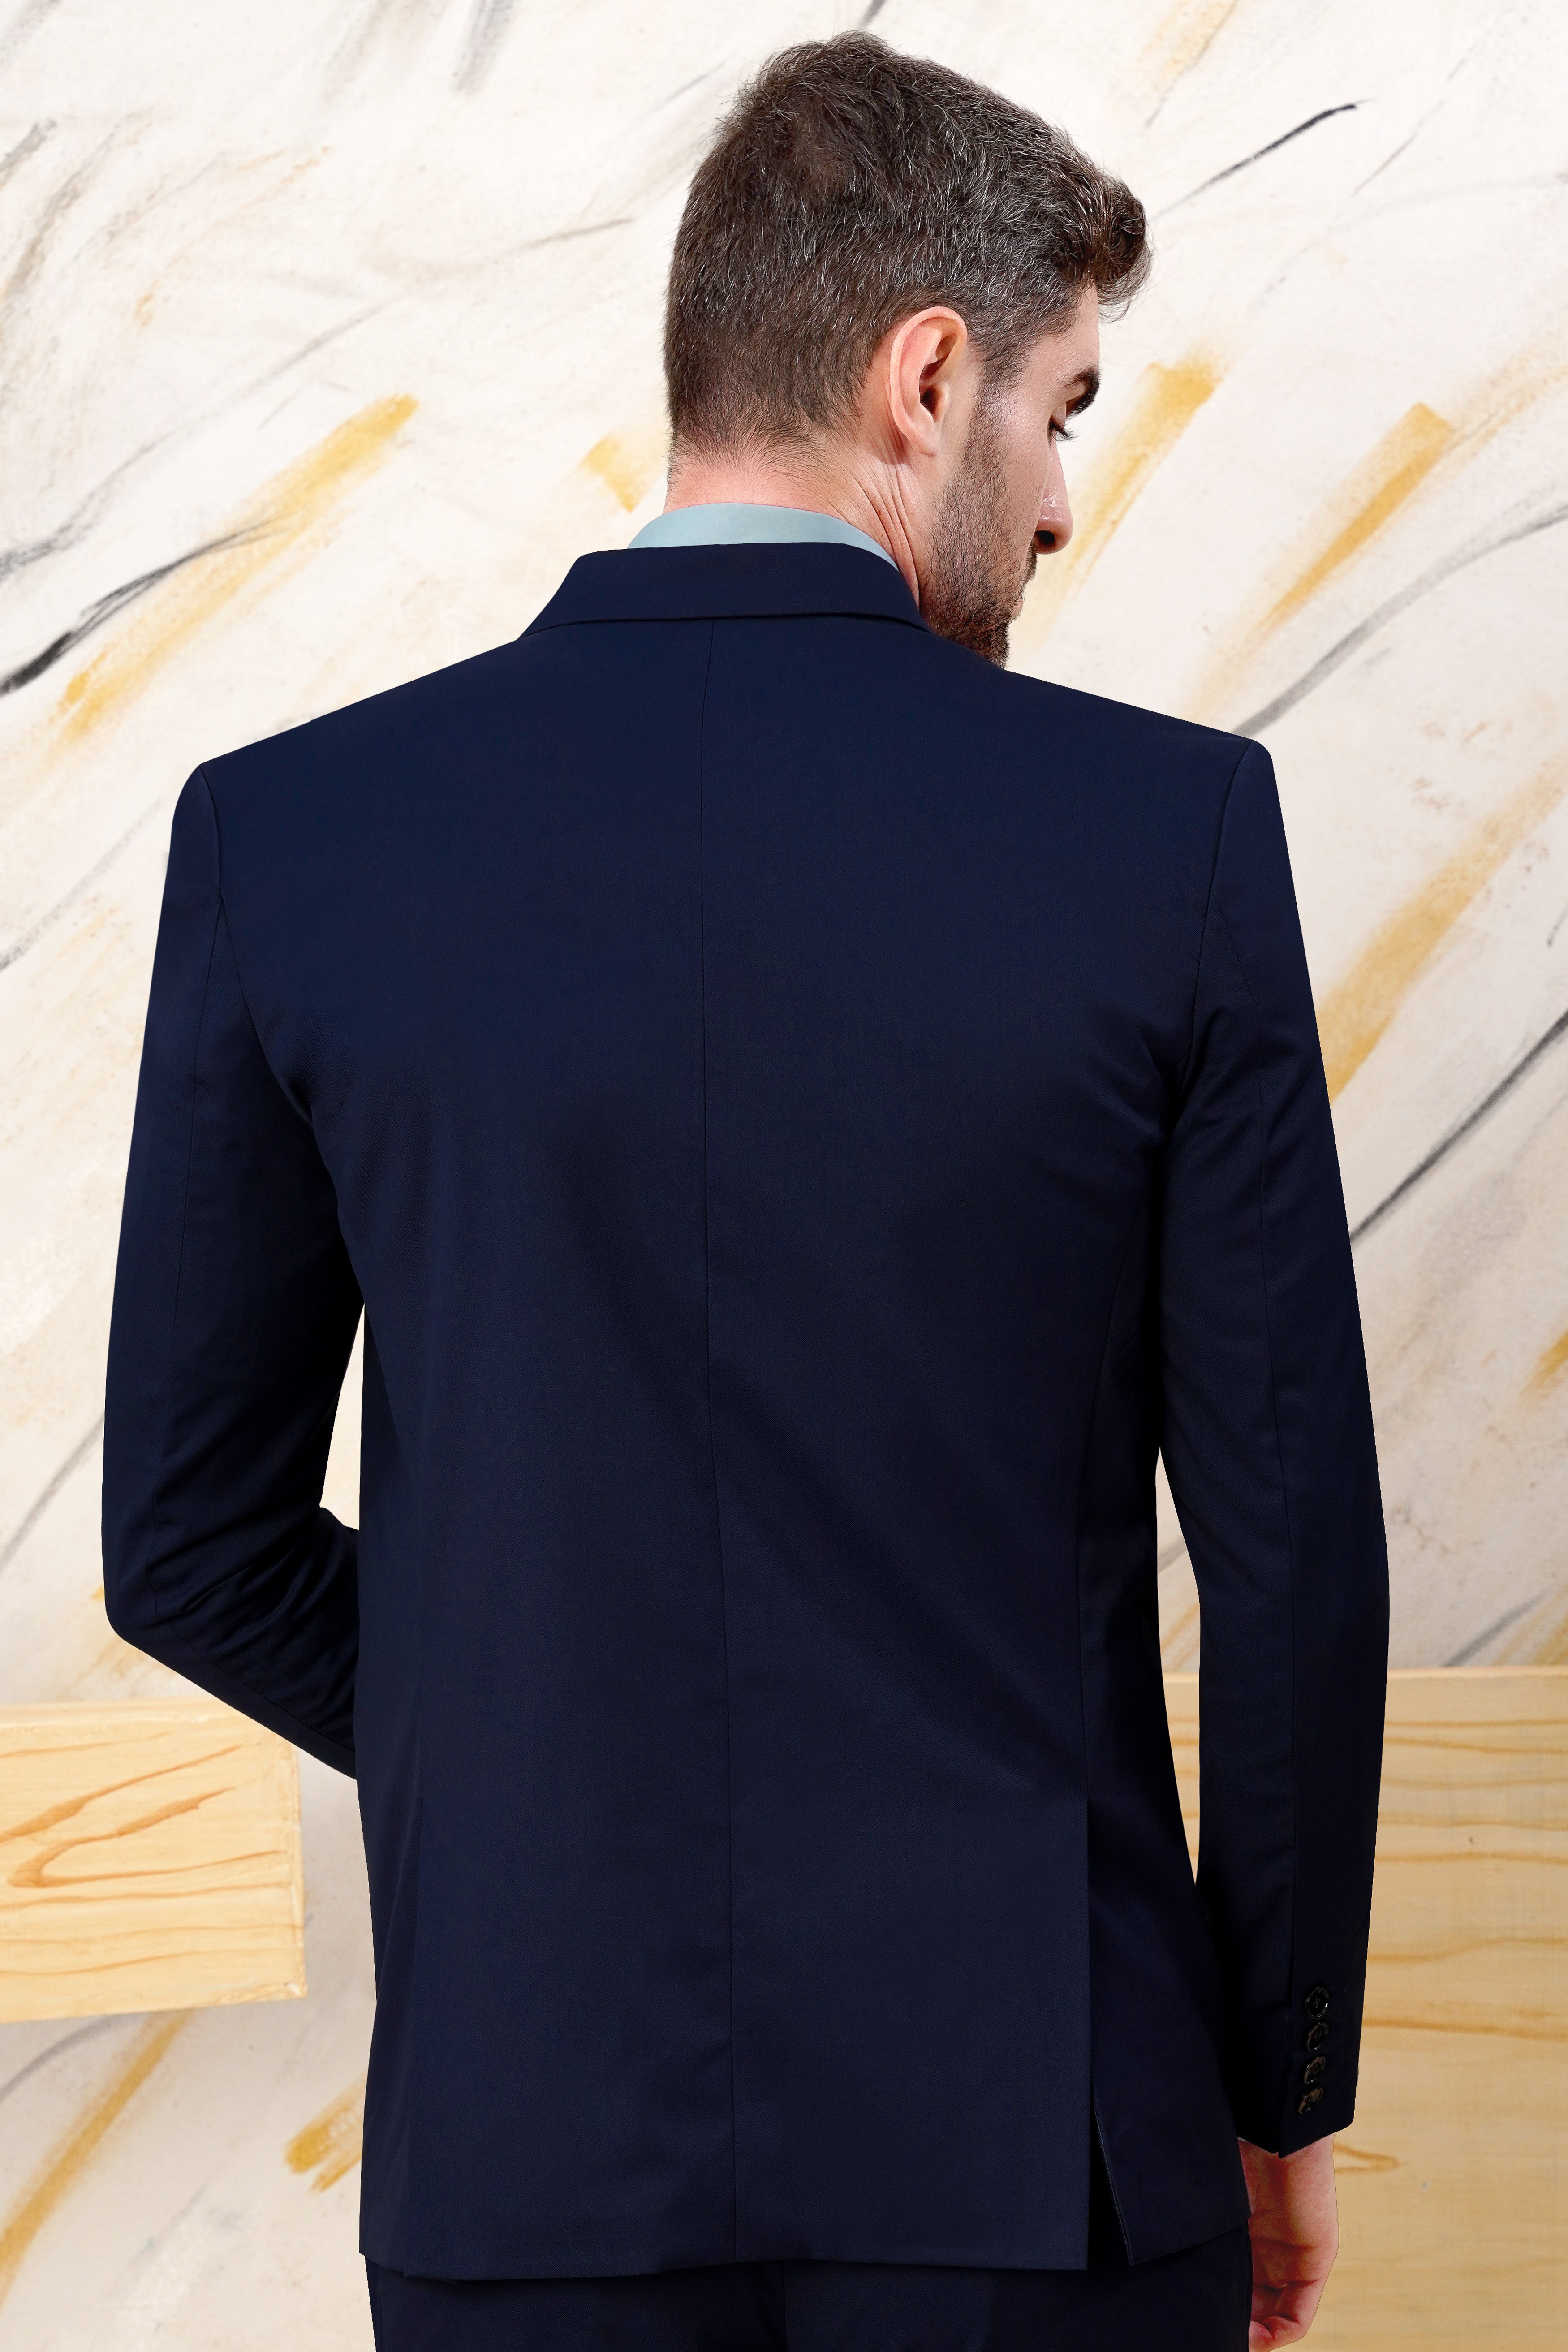 Cinder Blue Wool Rich Double Breasted Sports Blazer BL3077-DB-PP-36, BL3077-DB-PP-38, BL3077-DB-PP-40, BL3077-DB-PP-42, BL3077-DB-PP-44, BL3077-DB-PP-46, BL3077-DB-PP-48, BL3077-DB-PP-50, BL3077-DB-PP-52, BL3077-DB-PP-54, BL3077-DB-PP-56, BL3077-DB-PP-58, BL3077-DB-PP-60